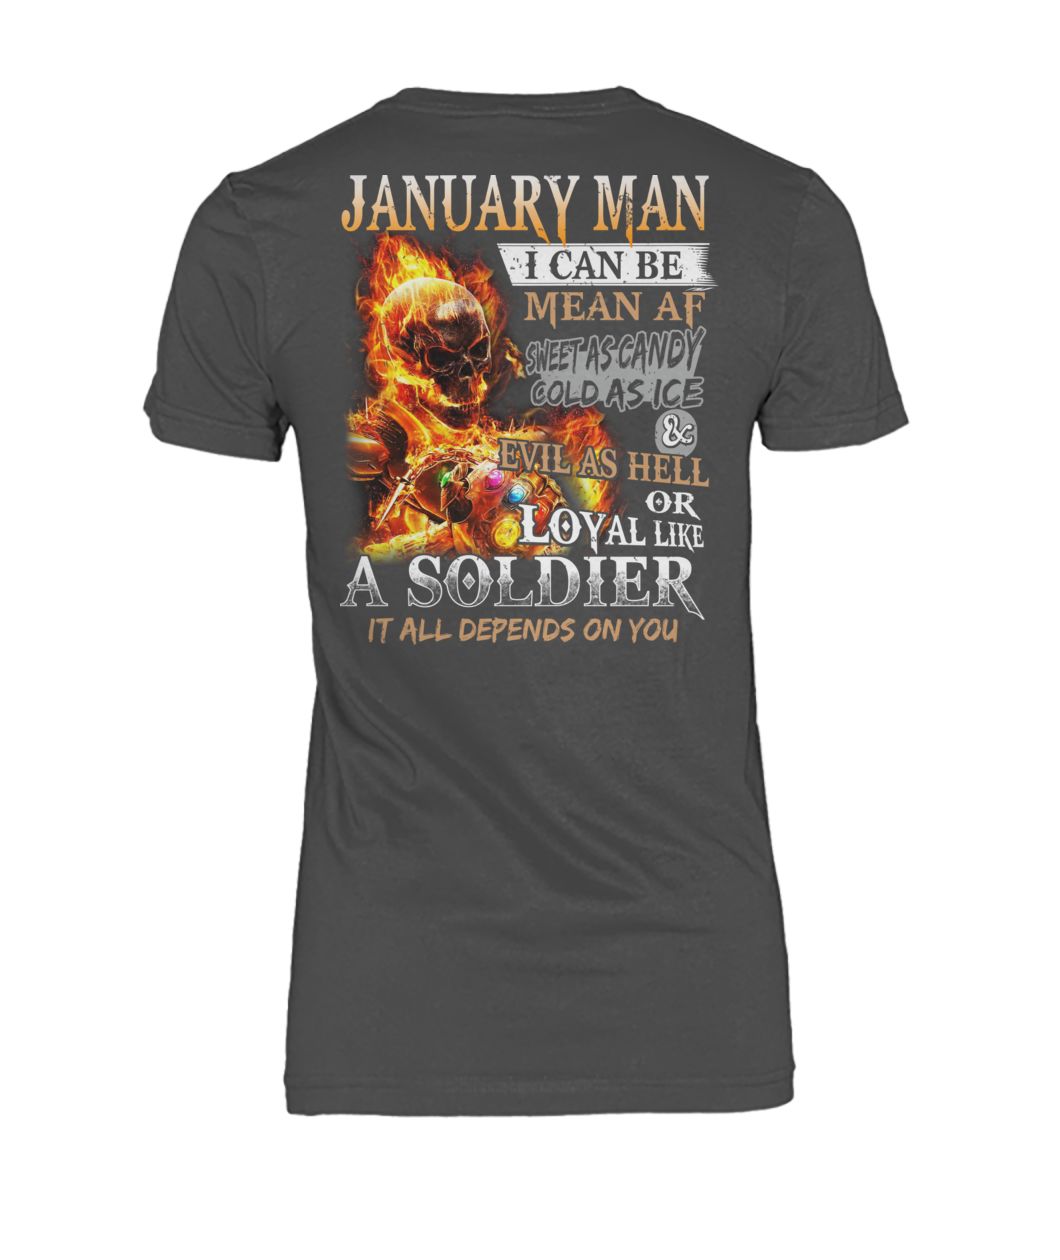 January man I can be mean af sweet as candy gold as ice and evil as hell women's crew tee